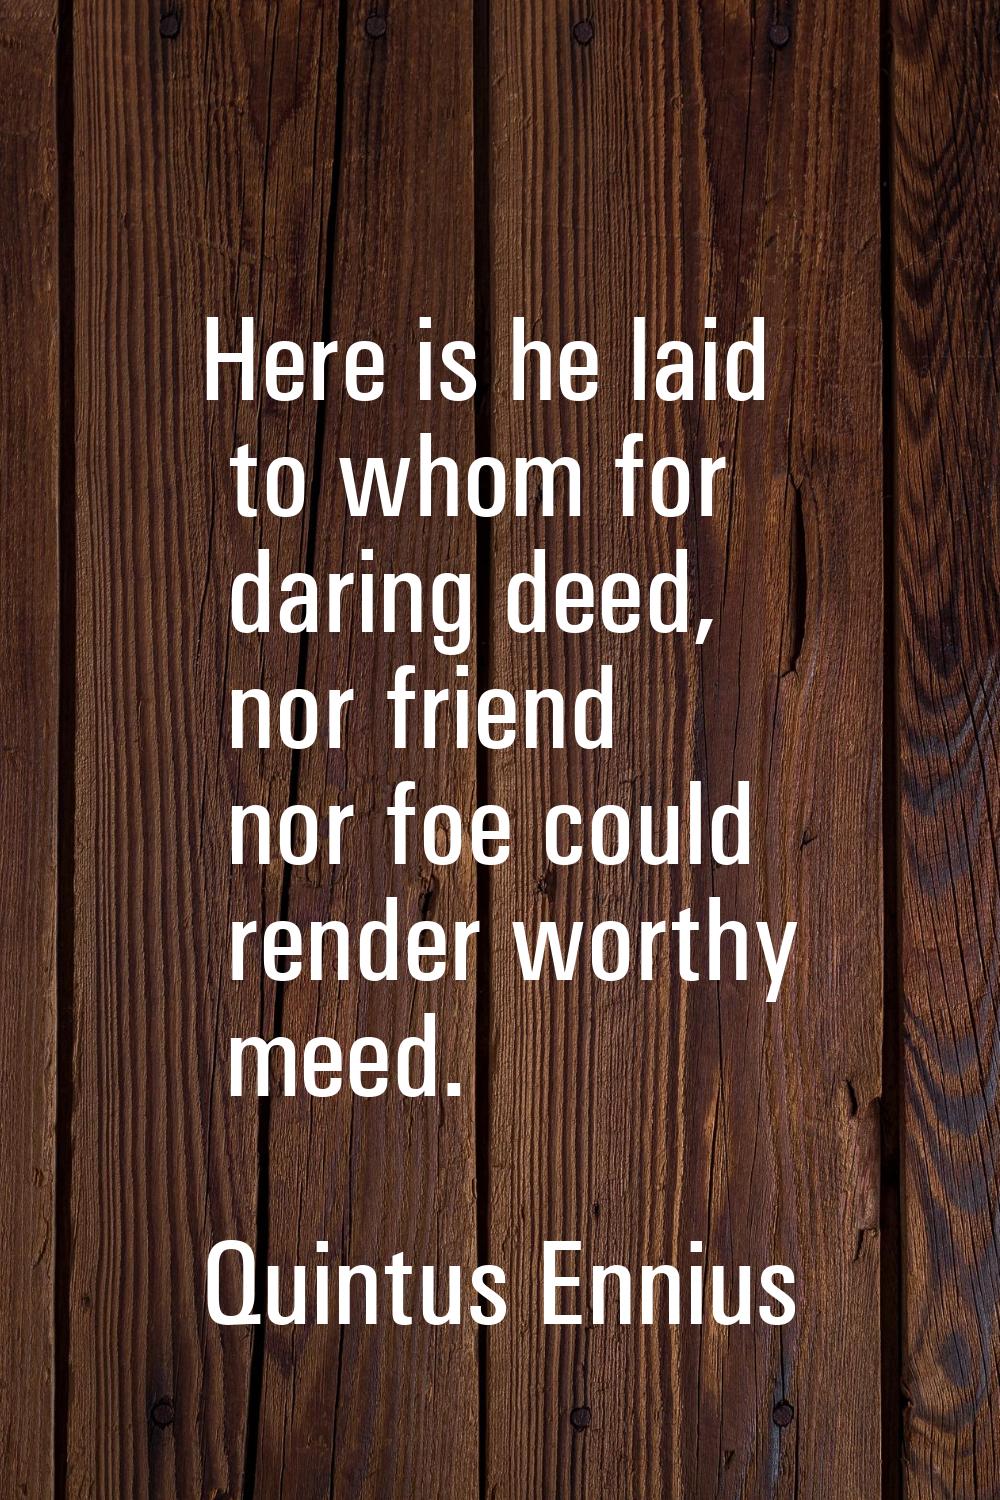 Here is he laid to whom for daring deed, nor friend nor foe could render worthy meed.